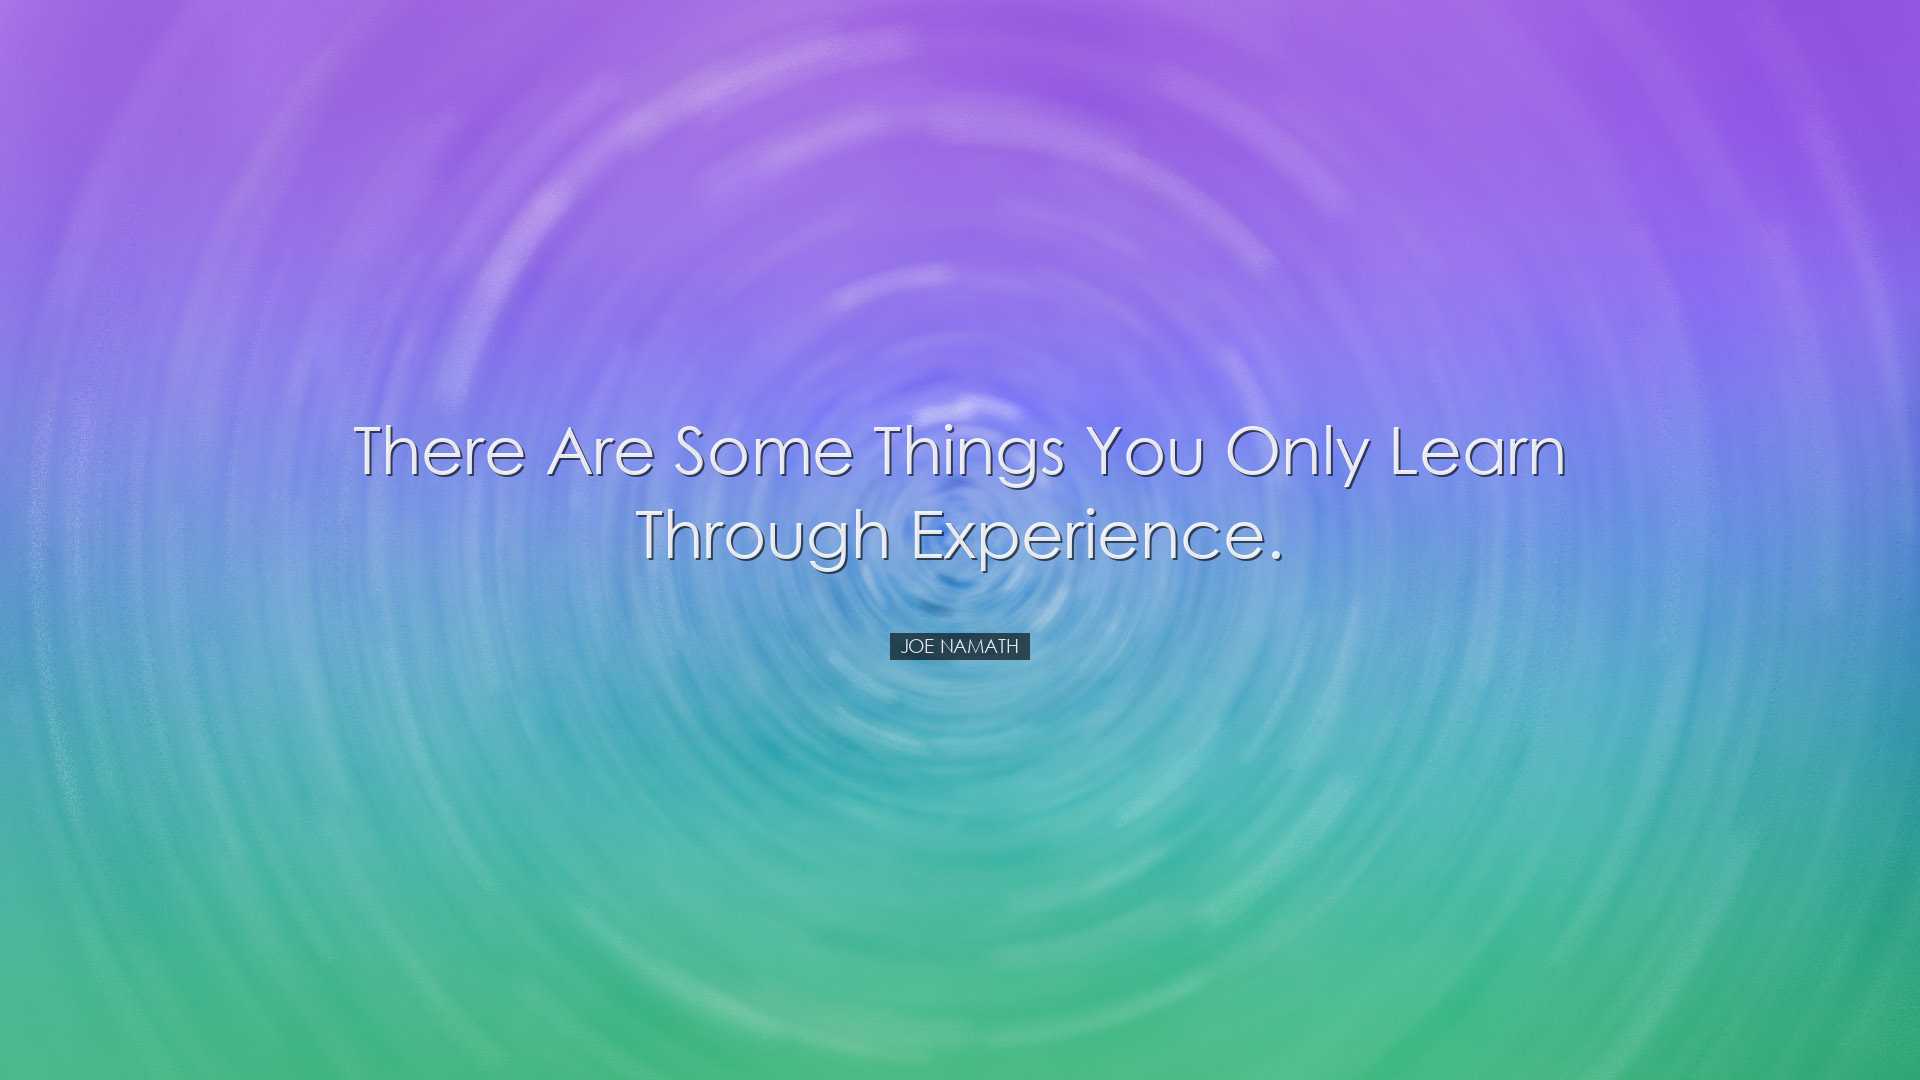 There are some things you only learn through experience. - Joe Nam